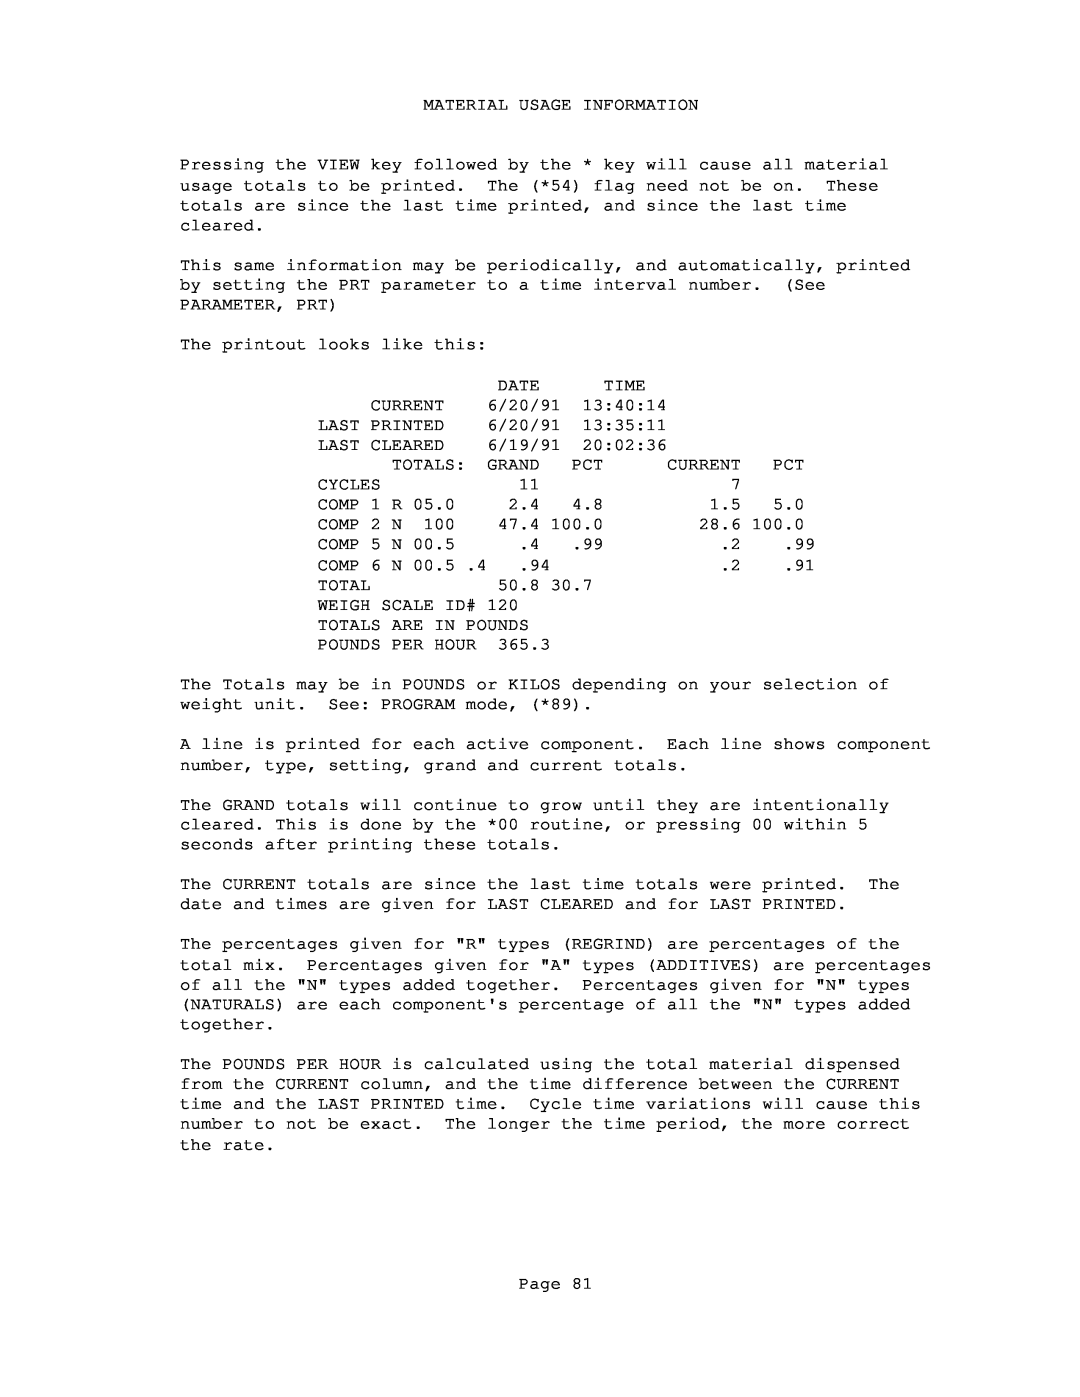 Conair WSB Material Usage Information, PARAMETER, PRT The printout looks like this, Date, Time, Current, 6/20/91, 13:40:14 